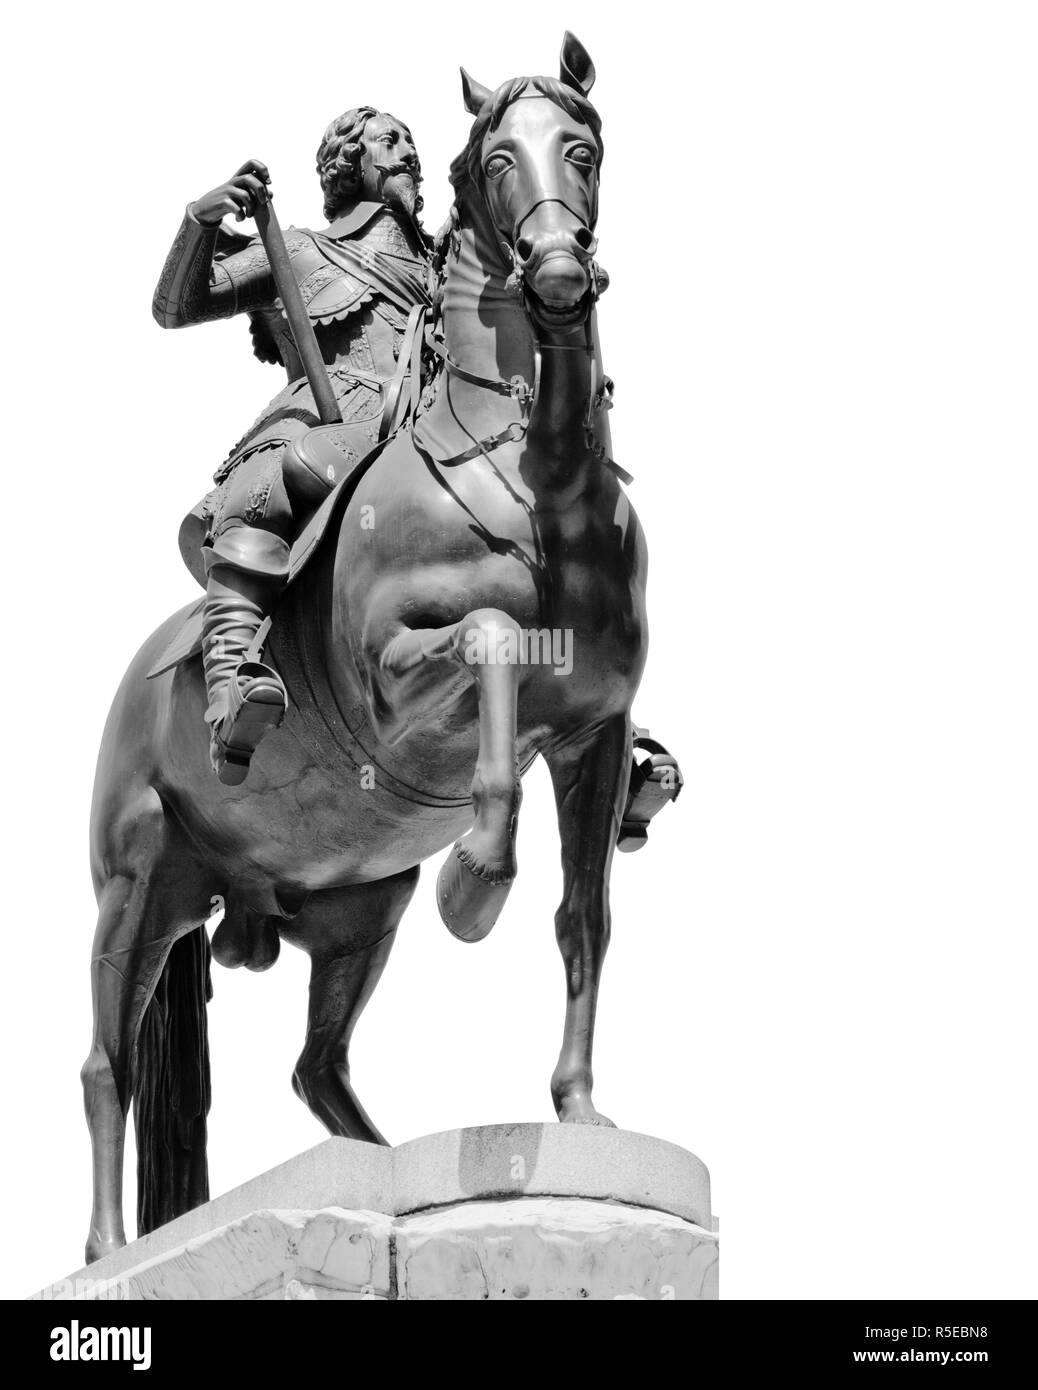 Equestrian statue of King Charles 1st in Trafalgar Square, London,UK. created by French sculptor Hubert Le Sueur in1633. Stock Photo